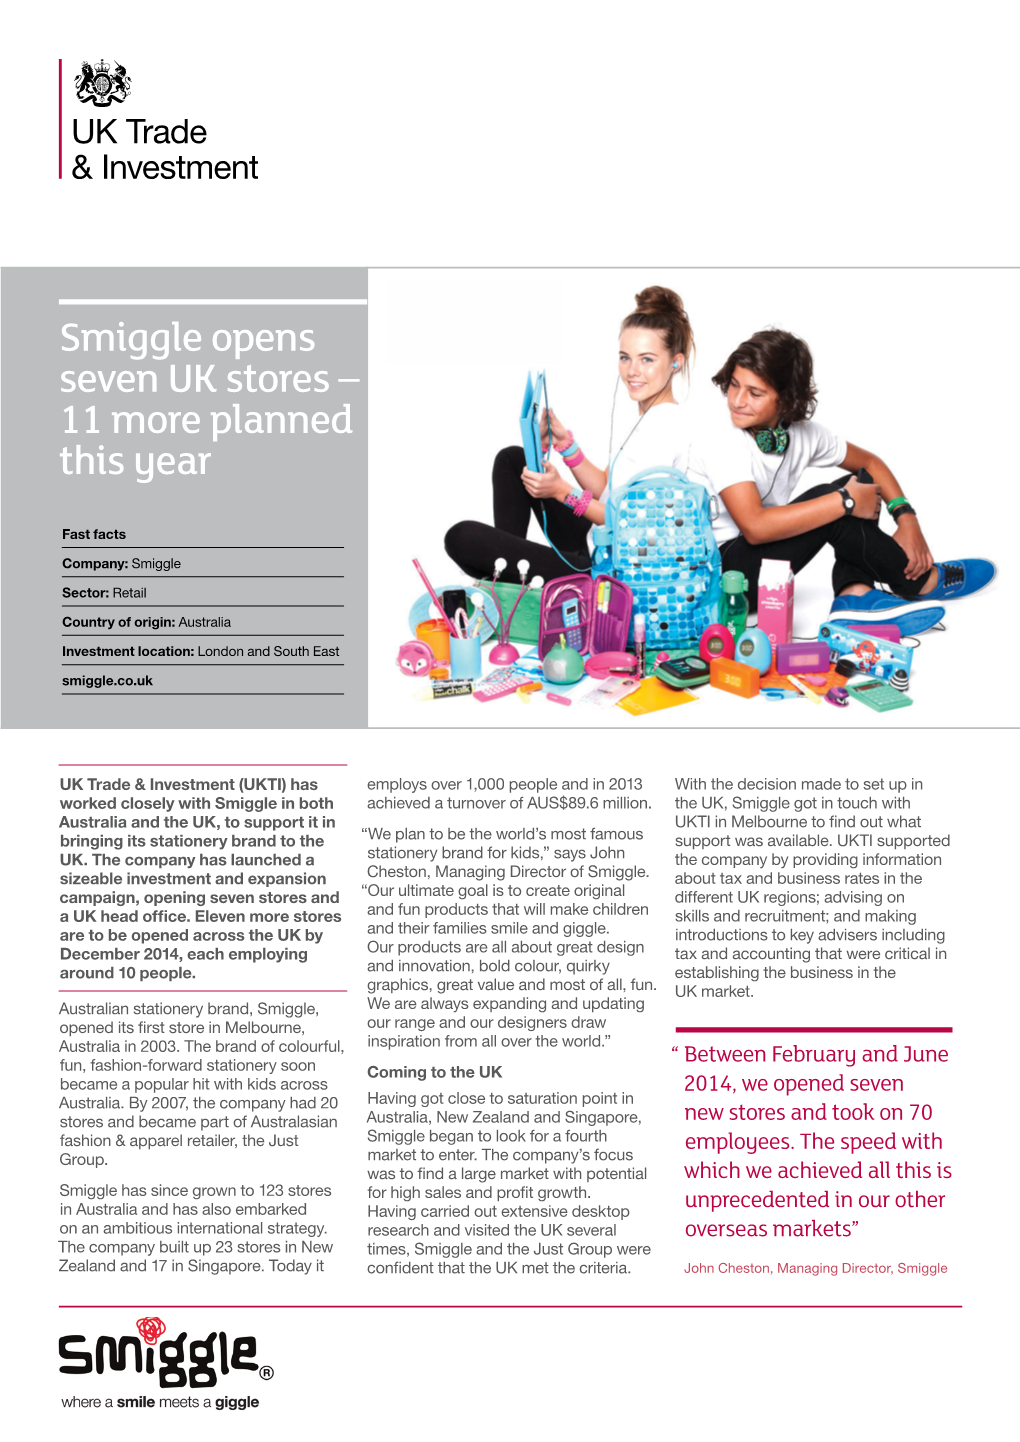 Smiggle Opens Seven UK Stores – 11 More Planned This Year